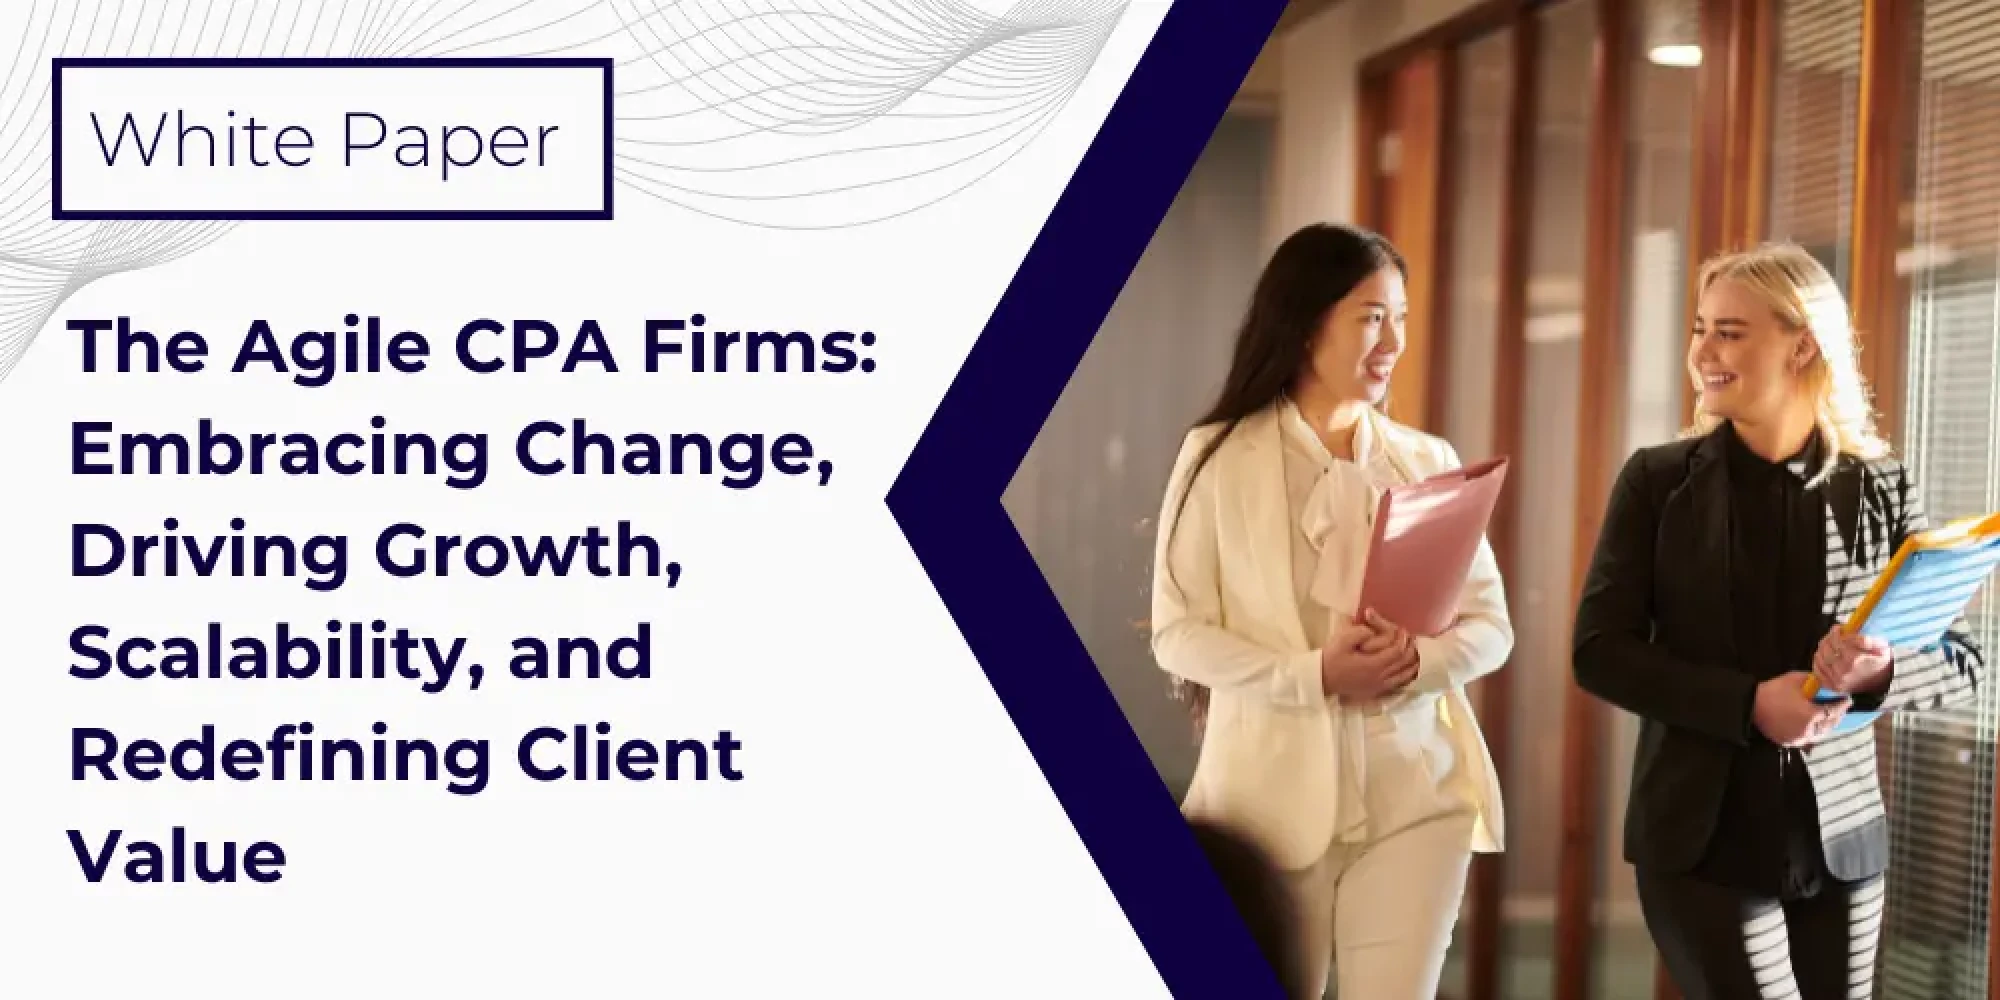 The Agile CPA Firms: Embracing Change, Driving Growth, Scalability, and Redefining Client Value